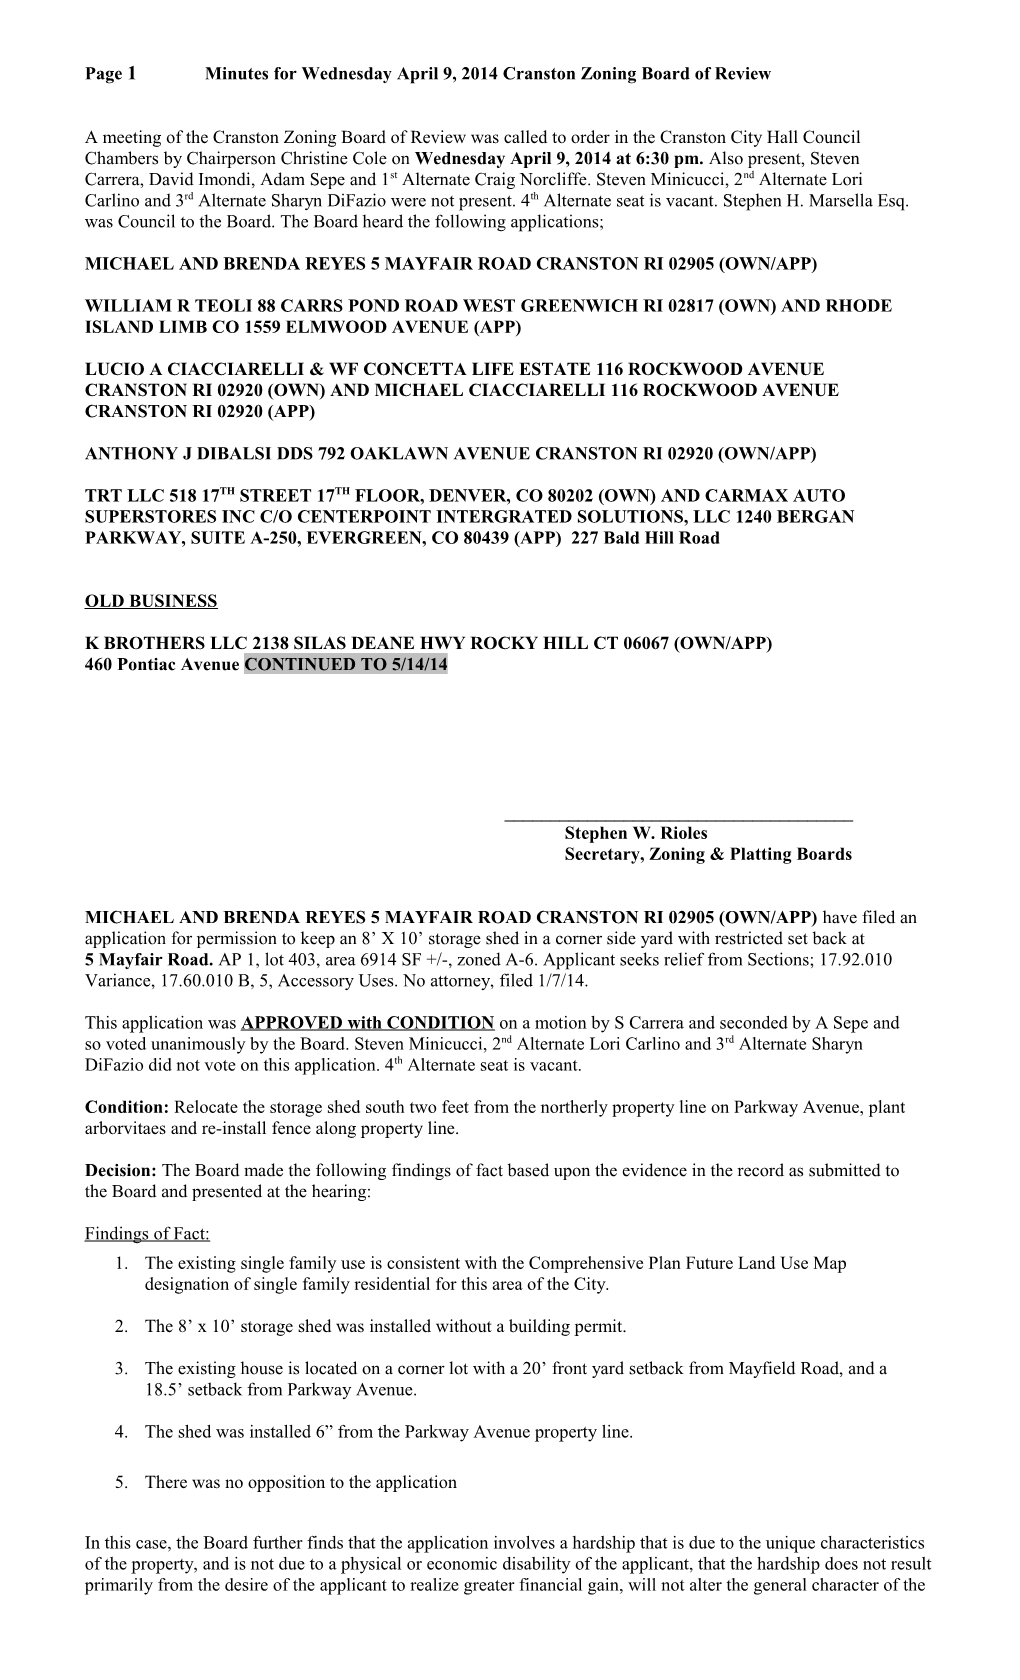 Page 3 Minutes for Wednesday April 9, 2014 Cranston Zoning Board of Review